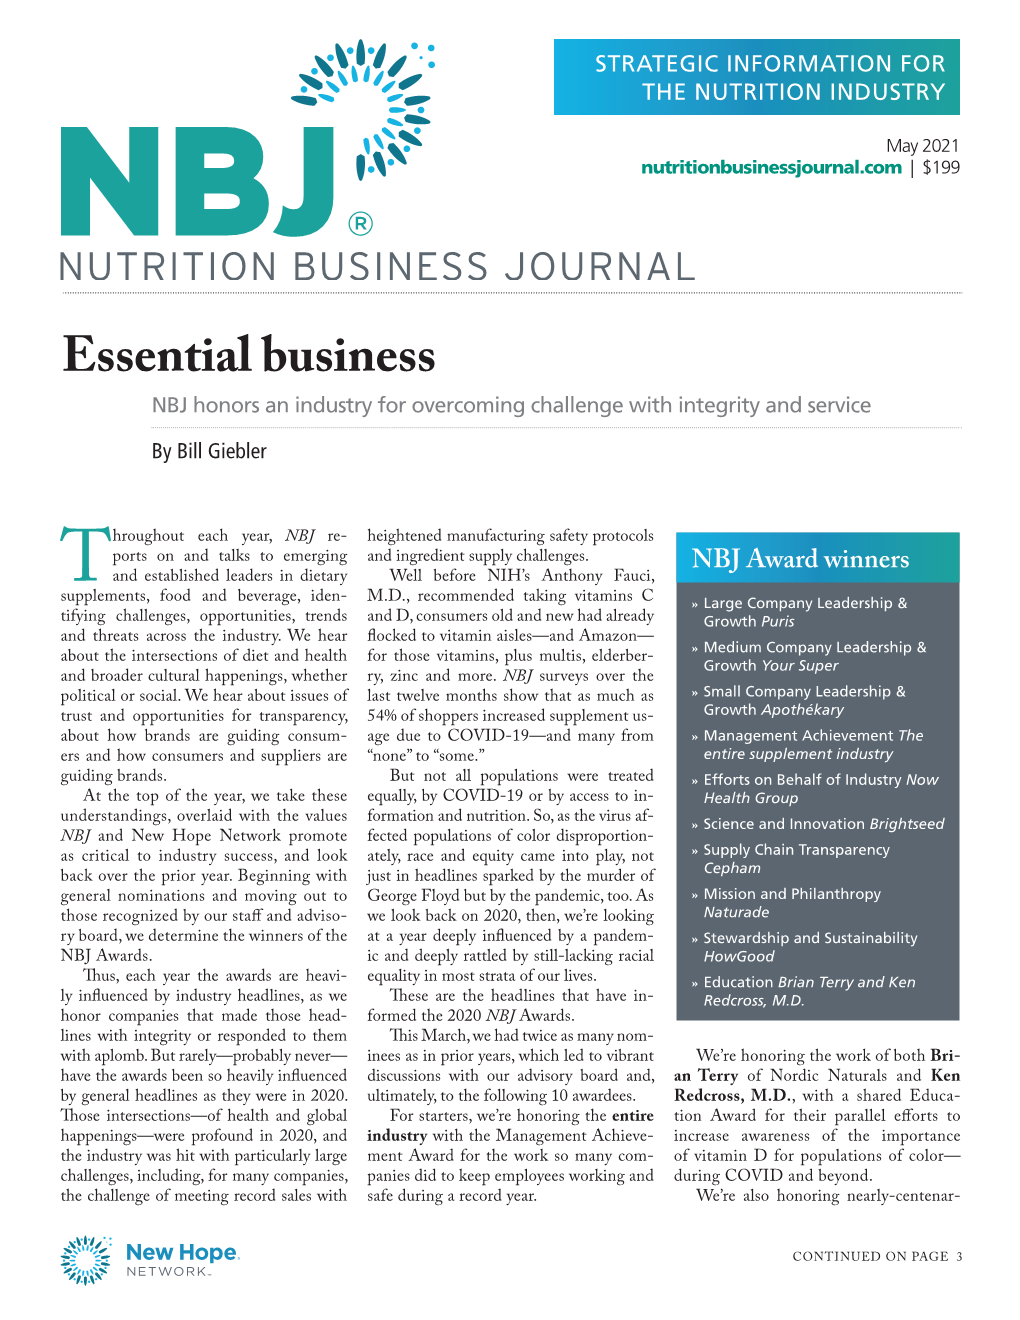 NBJ Honors an Industry for Overcoming Challenge with Integrity and Service